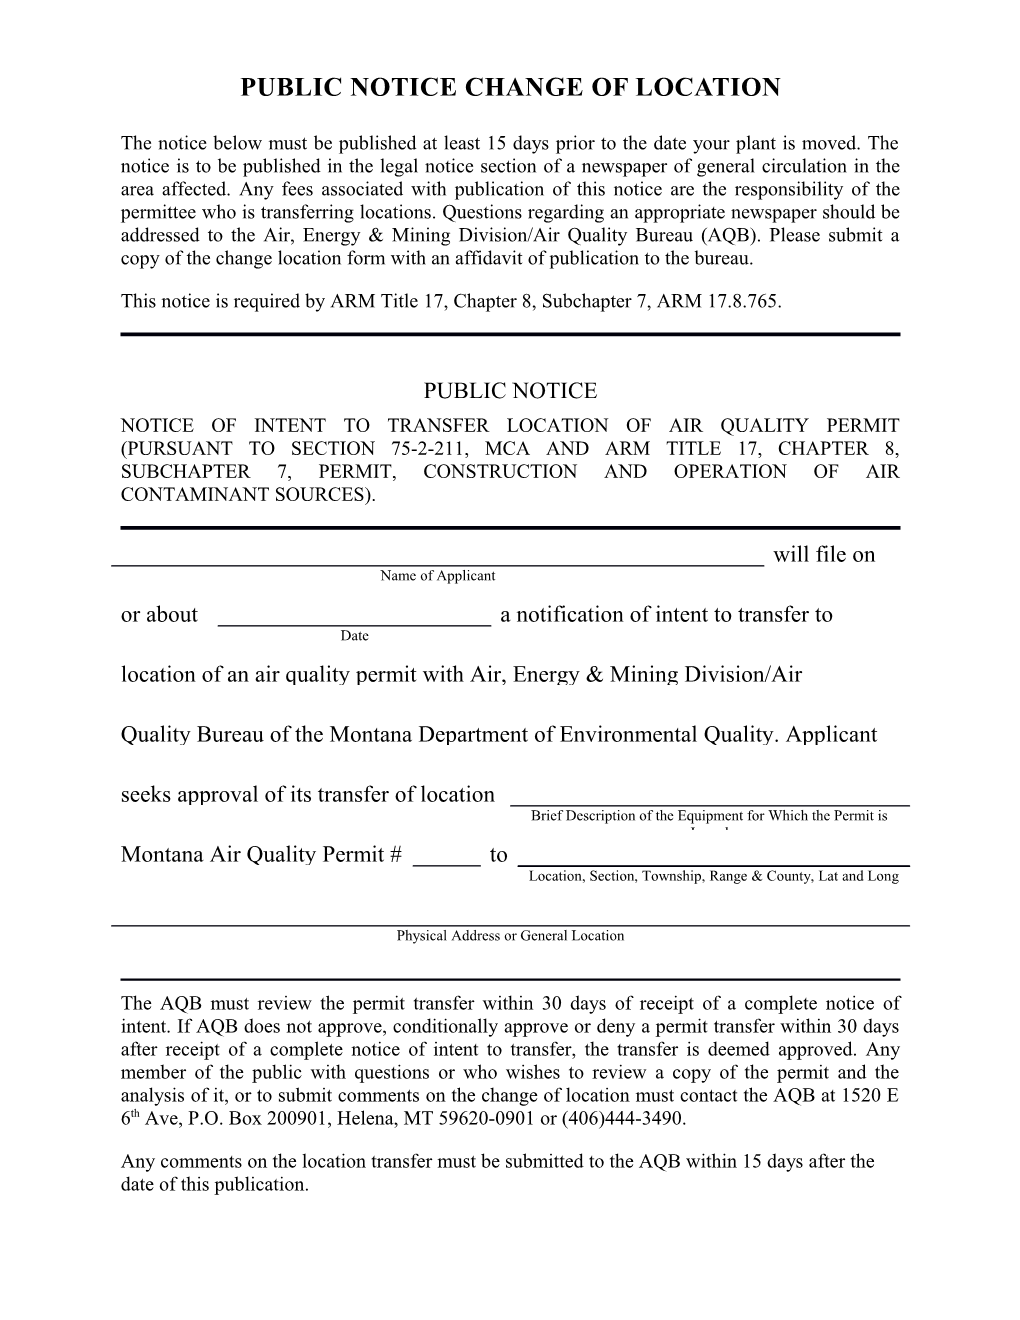 This Notice Is Required by ARM Title 17, Chapter 8, Subchapter 7, ARM 17.8.765